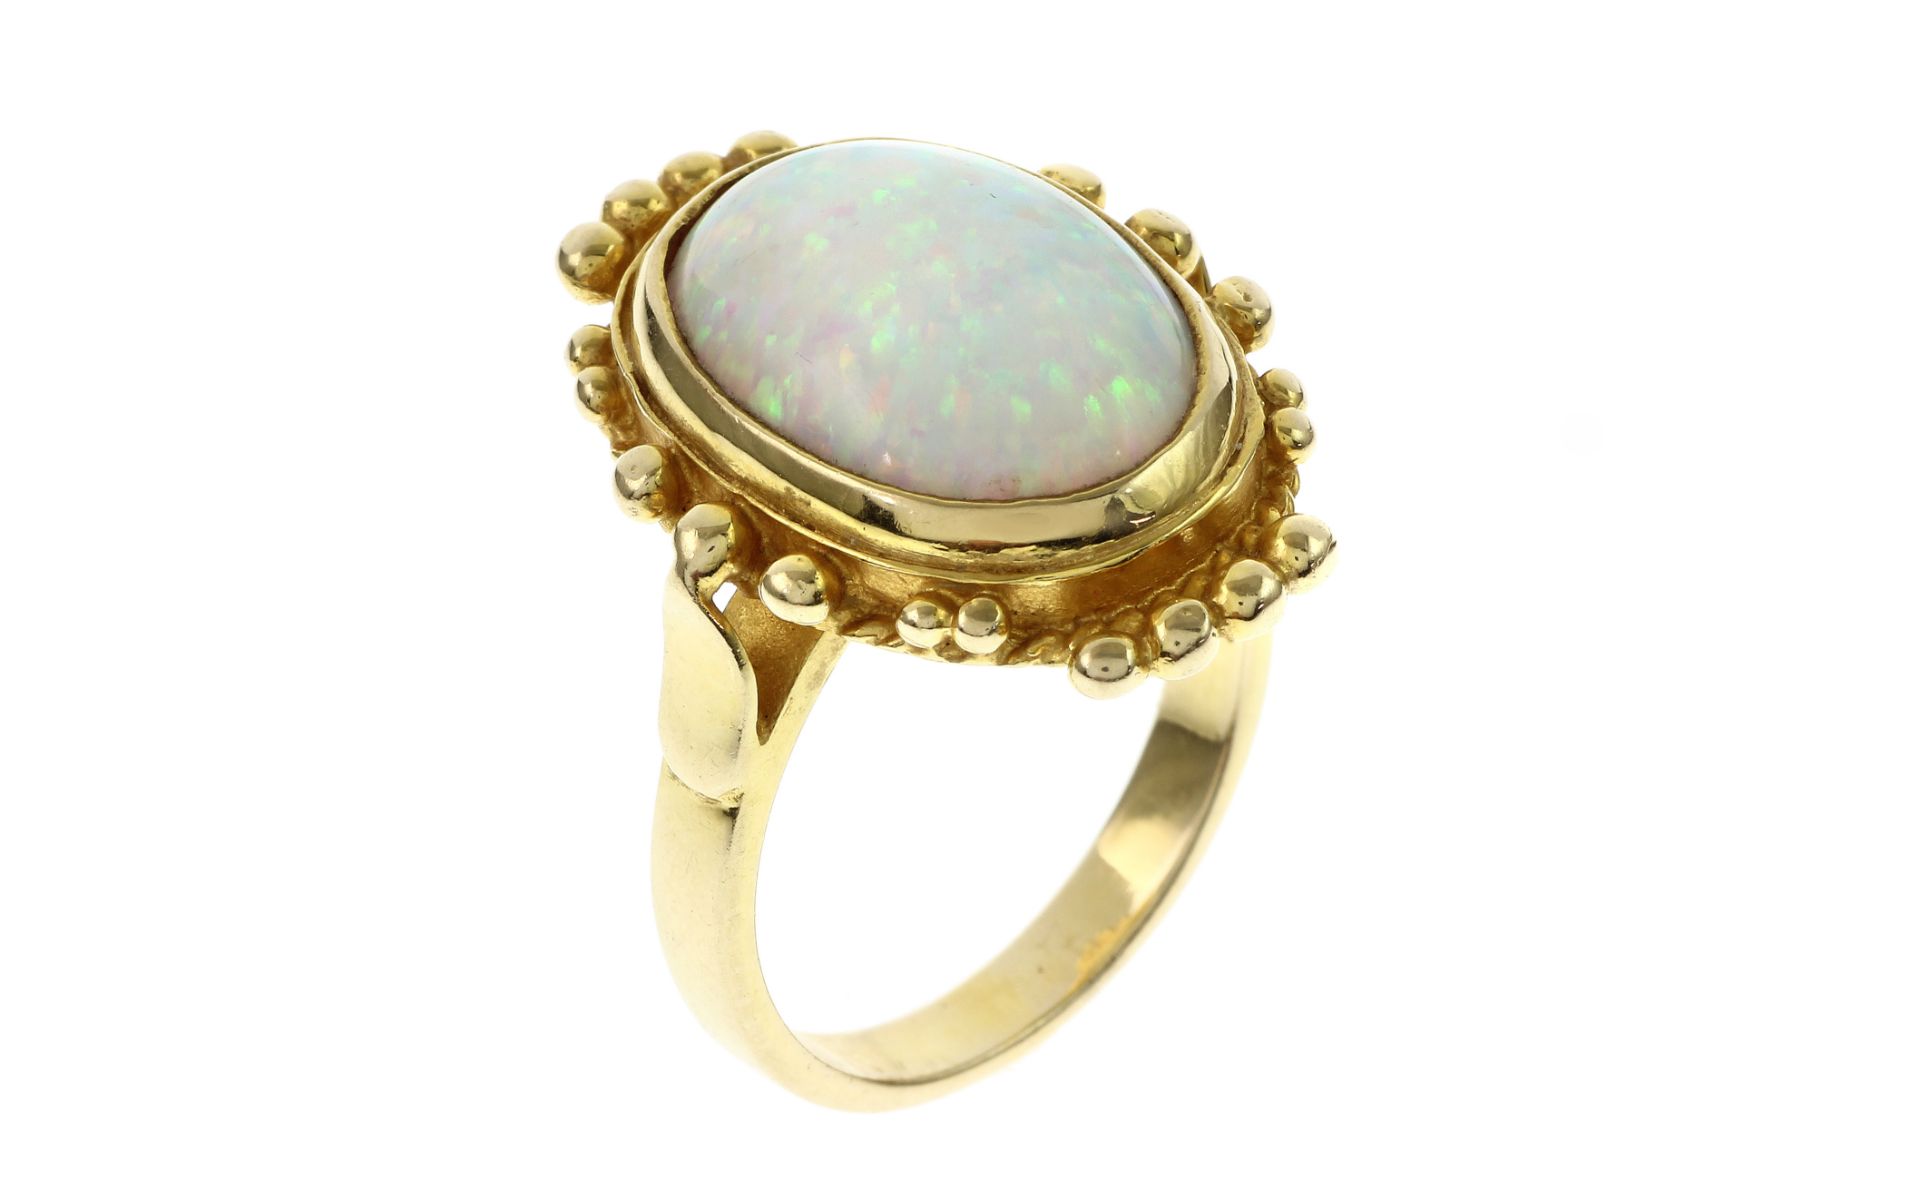 Ring 11.19g 585/- Gelbgold mit Opal. Ringgroesse 61 